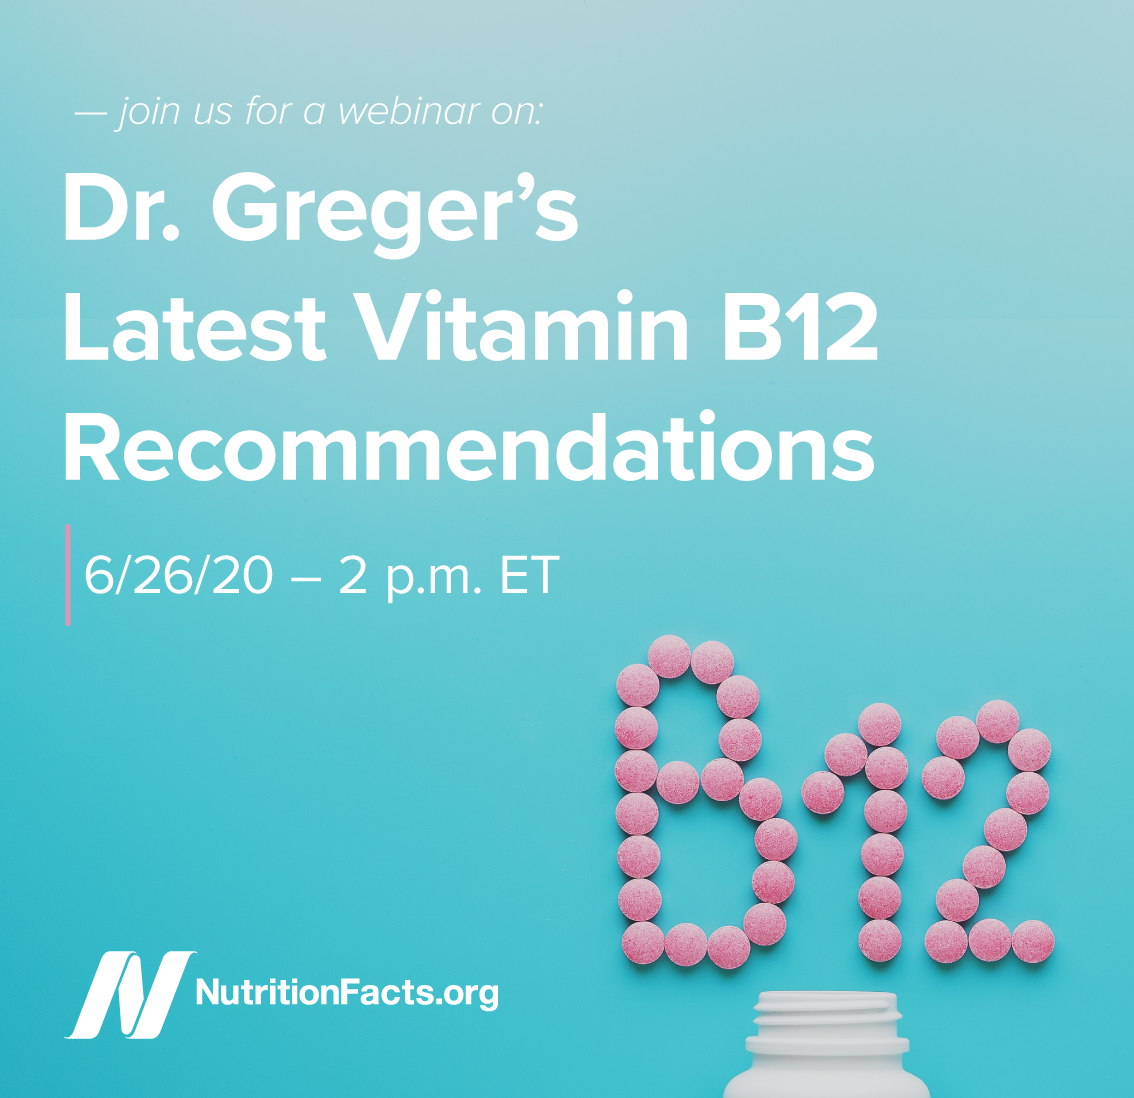 Dr. Greger’s Latest Vitamin B12 Recommendations